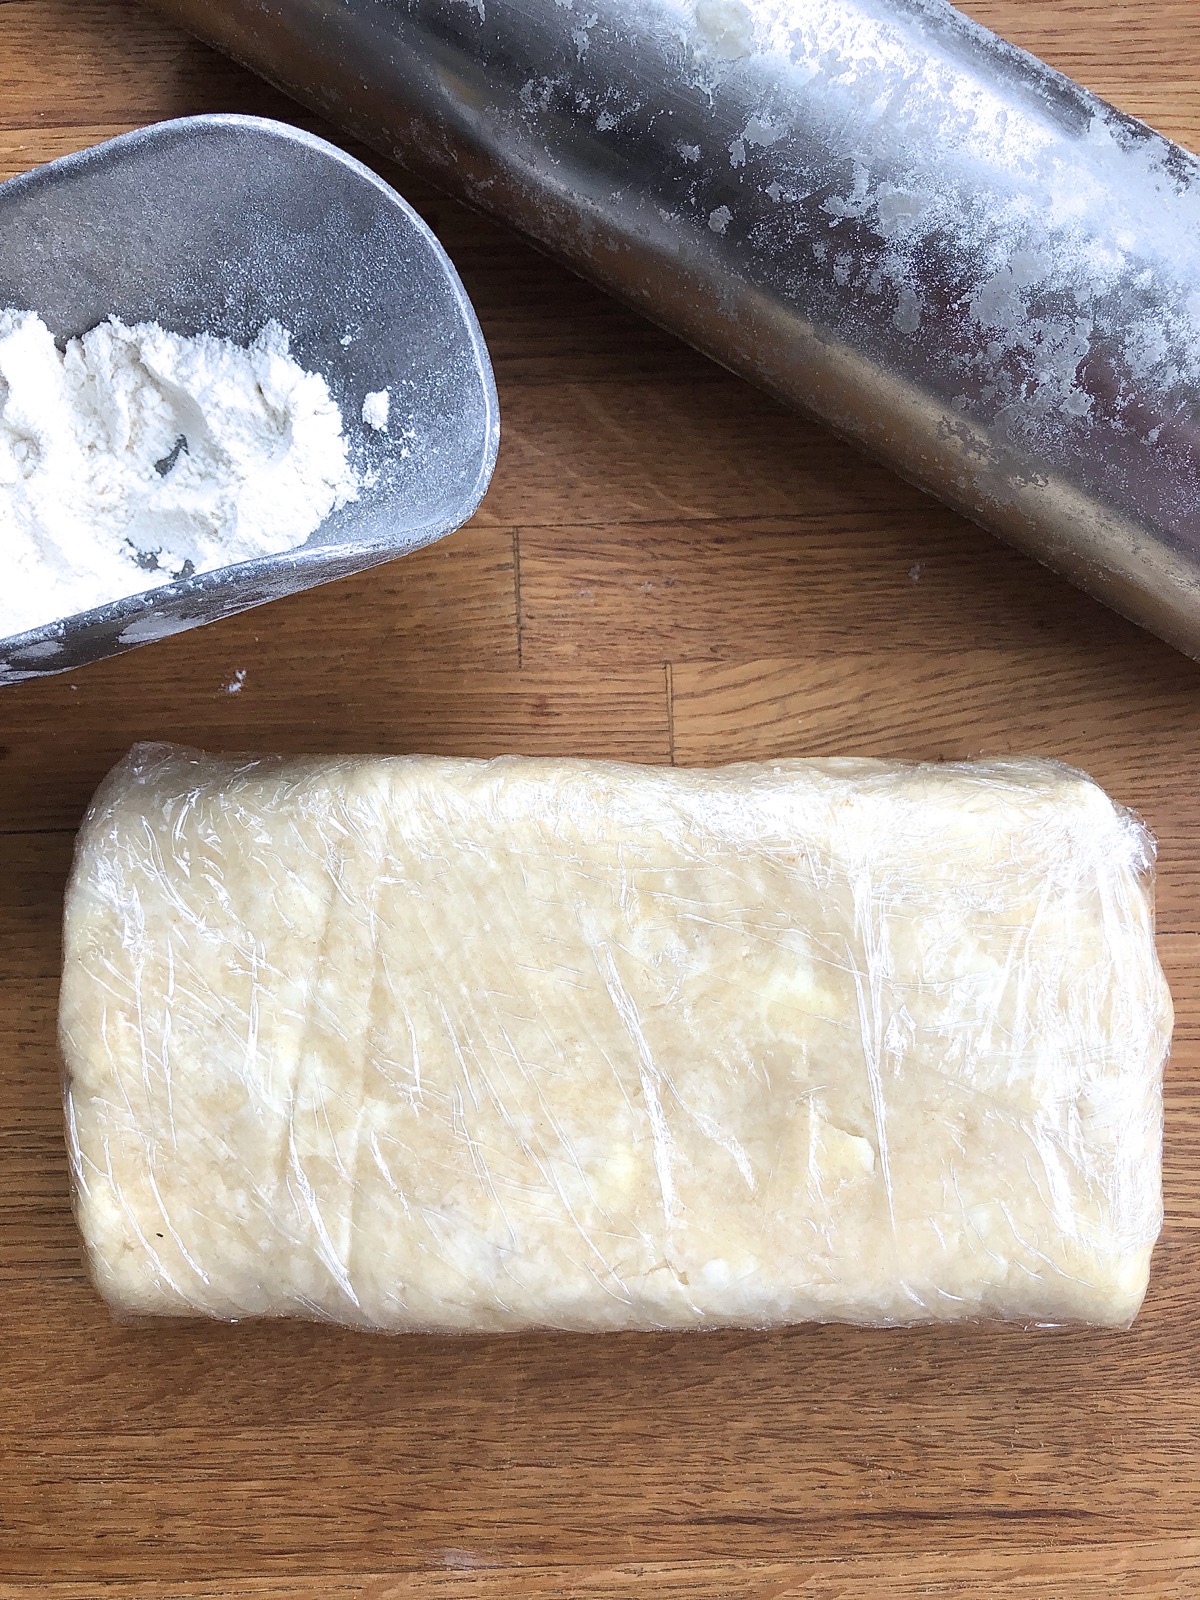 Super-flaky pie crust dough wrapped in plastic for the refrigerator